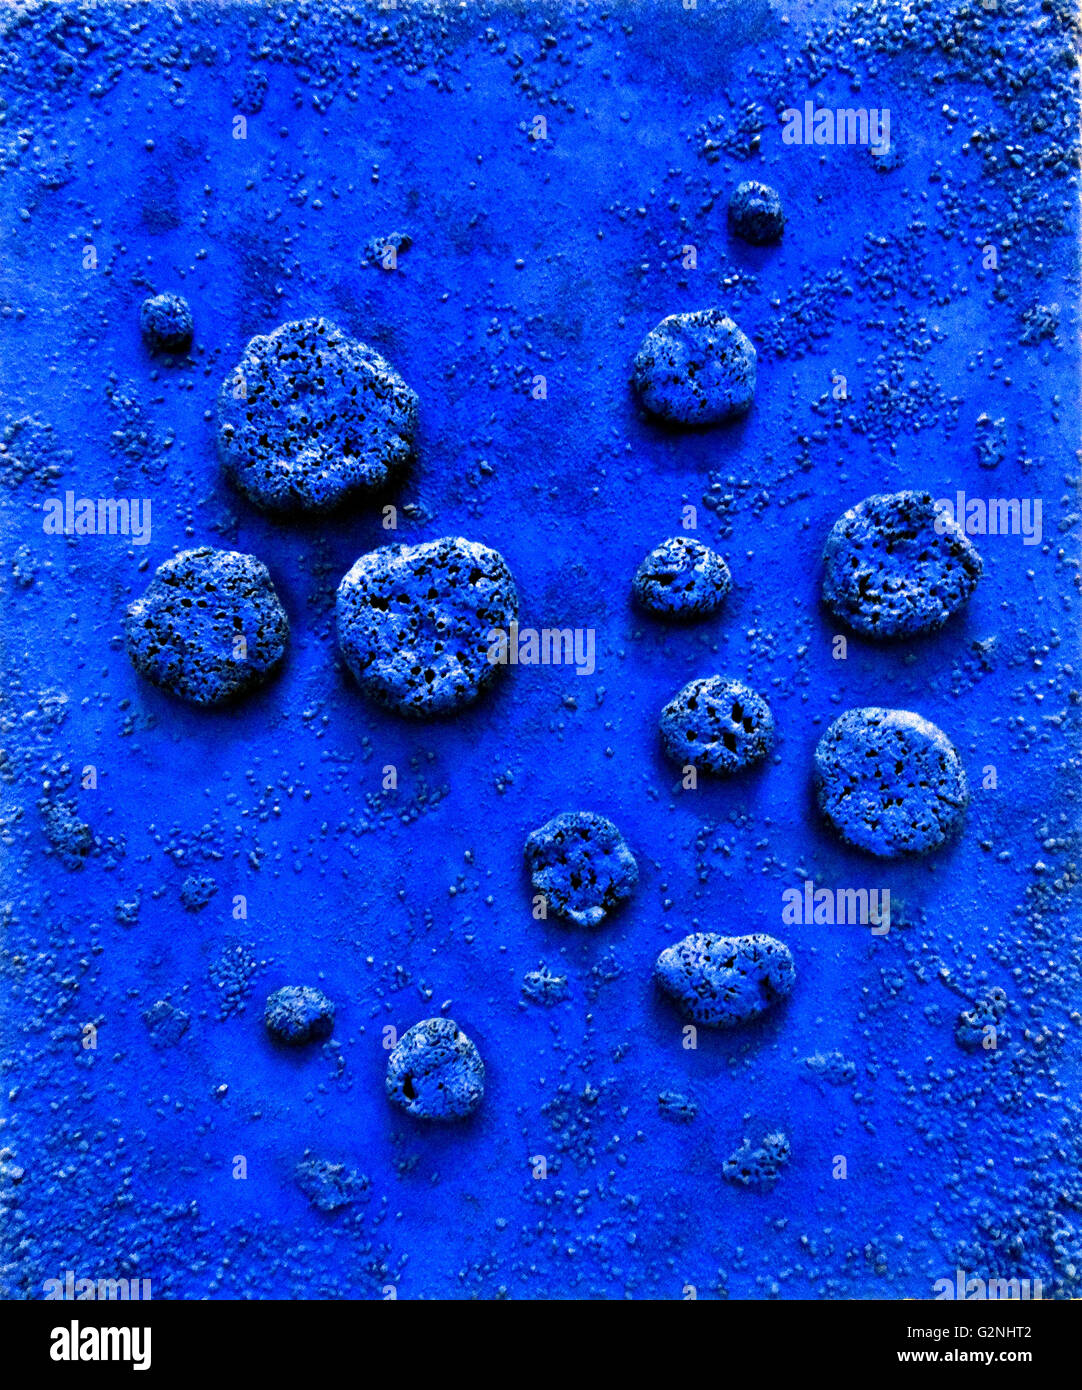 L'accord bleu by Yves Klein (1928-1962), using wood, sponges, small stones and paint. French artist considered an important figure in post-war European art. Stock Photo